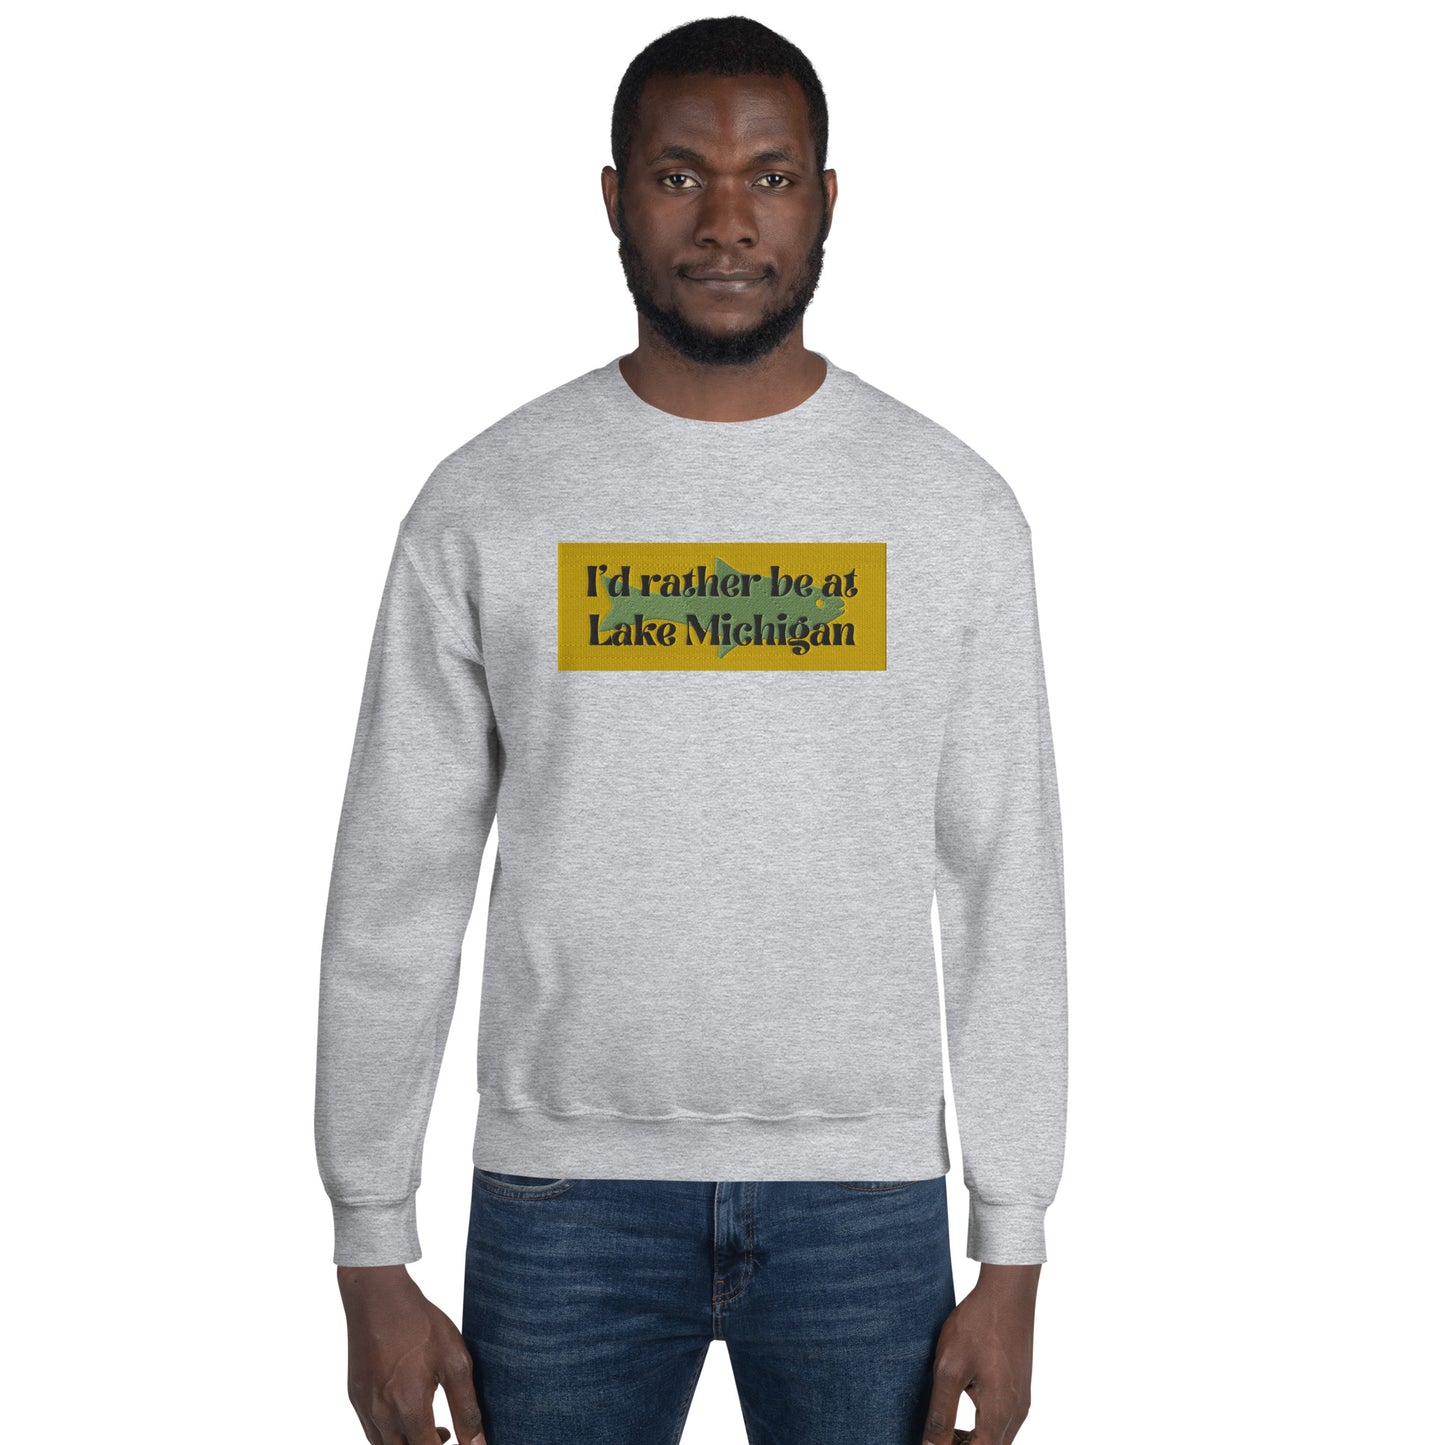 I'd Rather Be At Lake Michigan Embroidered Sweatshirt